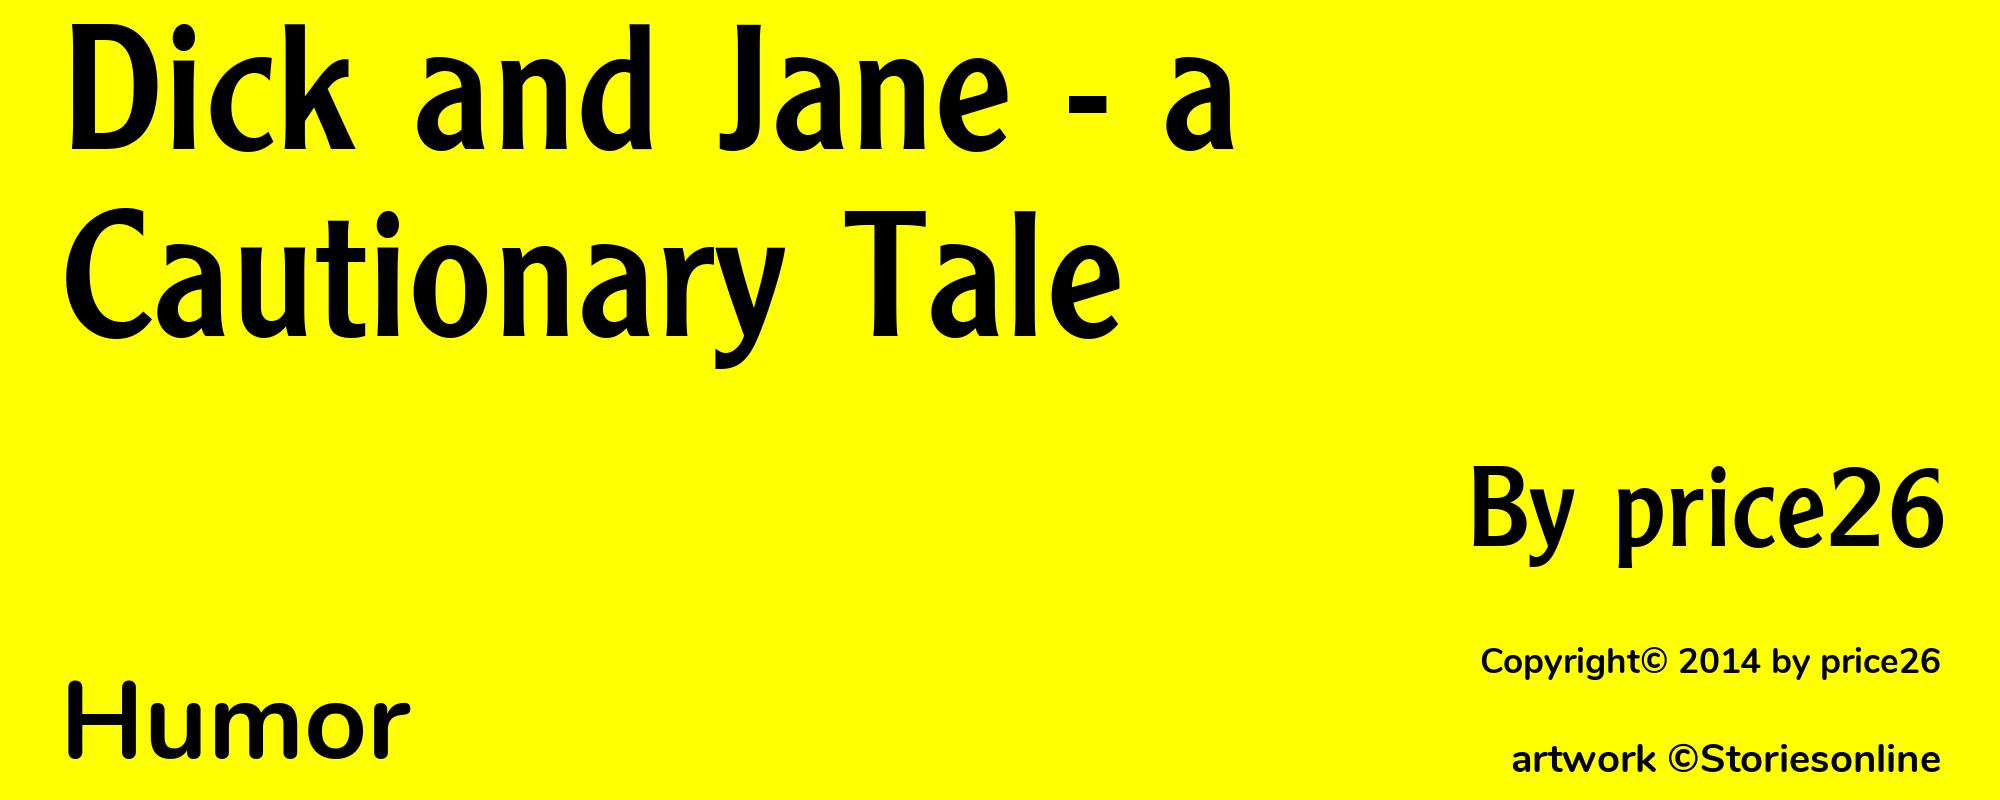 Dick and Jane - a Cautionary Tale - Cover